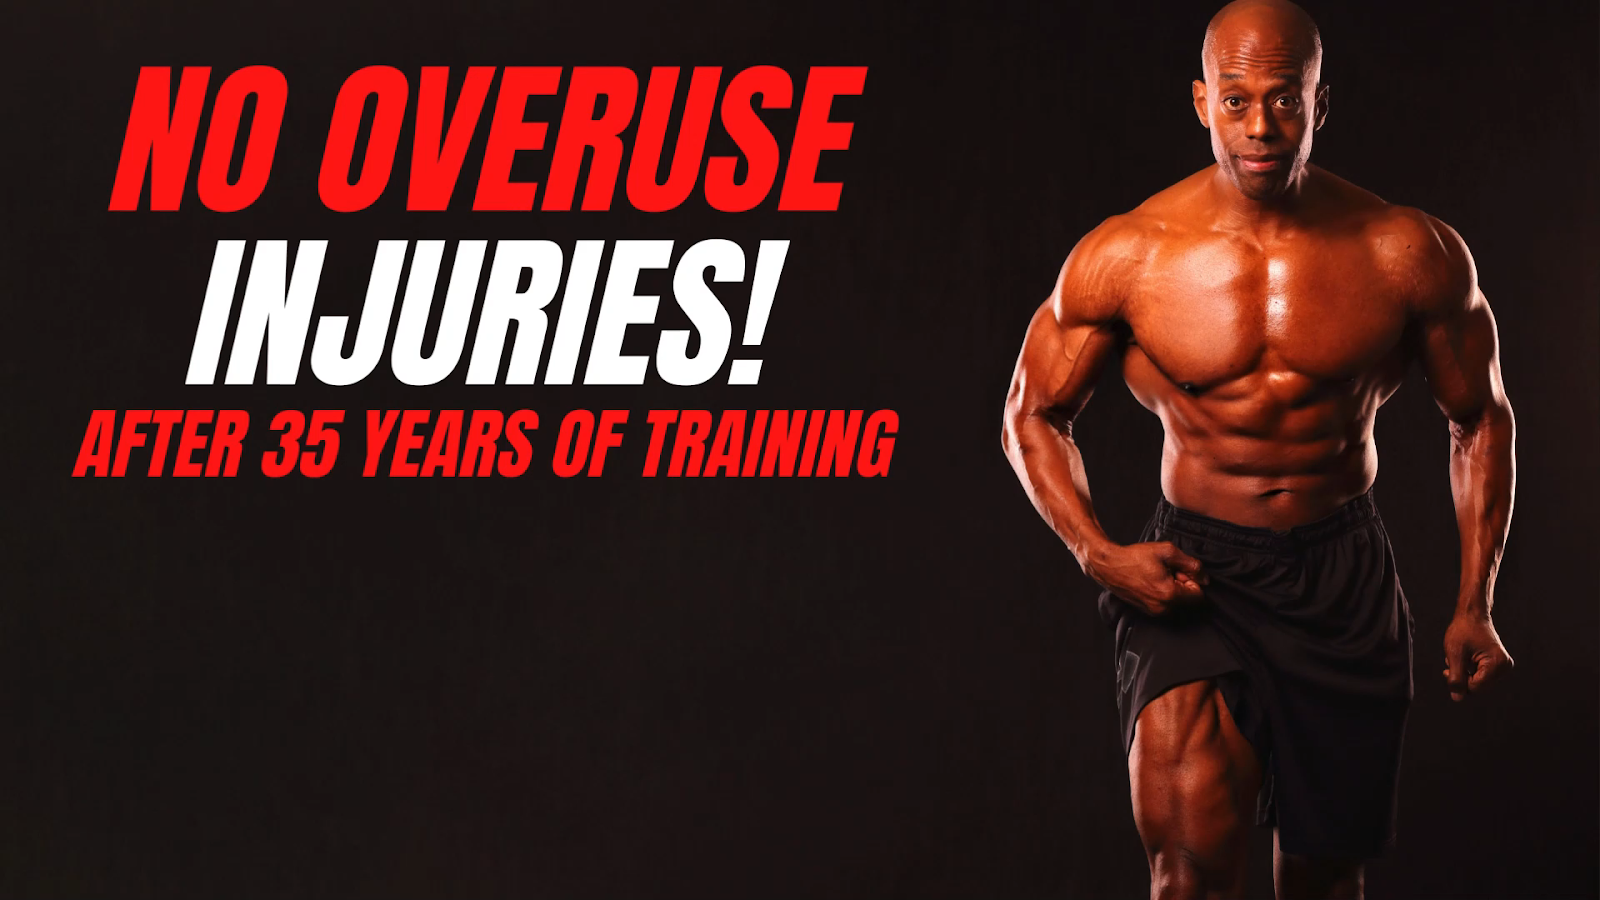 Natural Bodybuilder Kevin Richardson has had no overuse injuries in 35 years